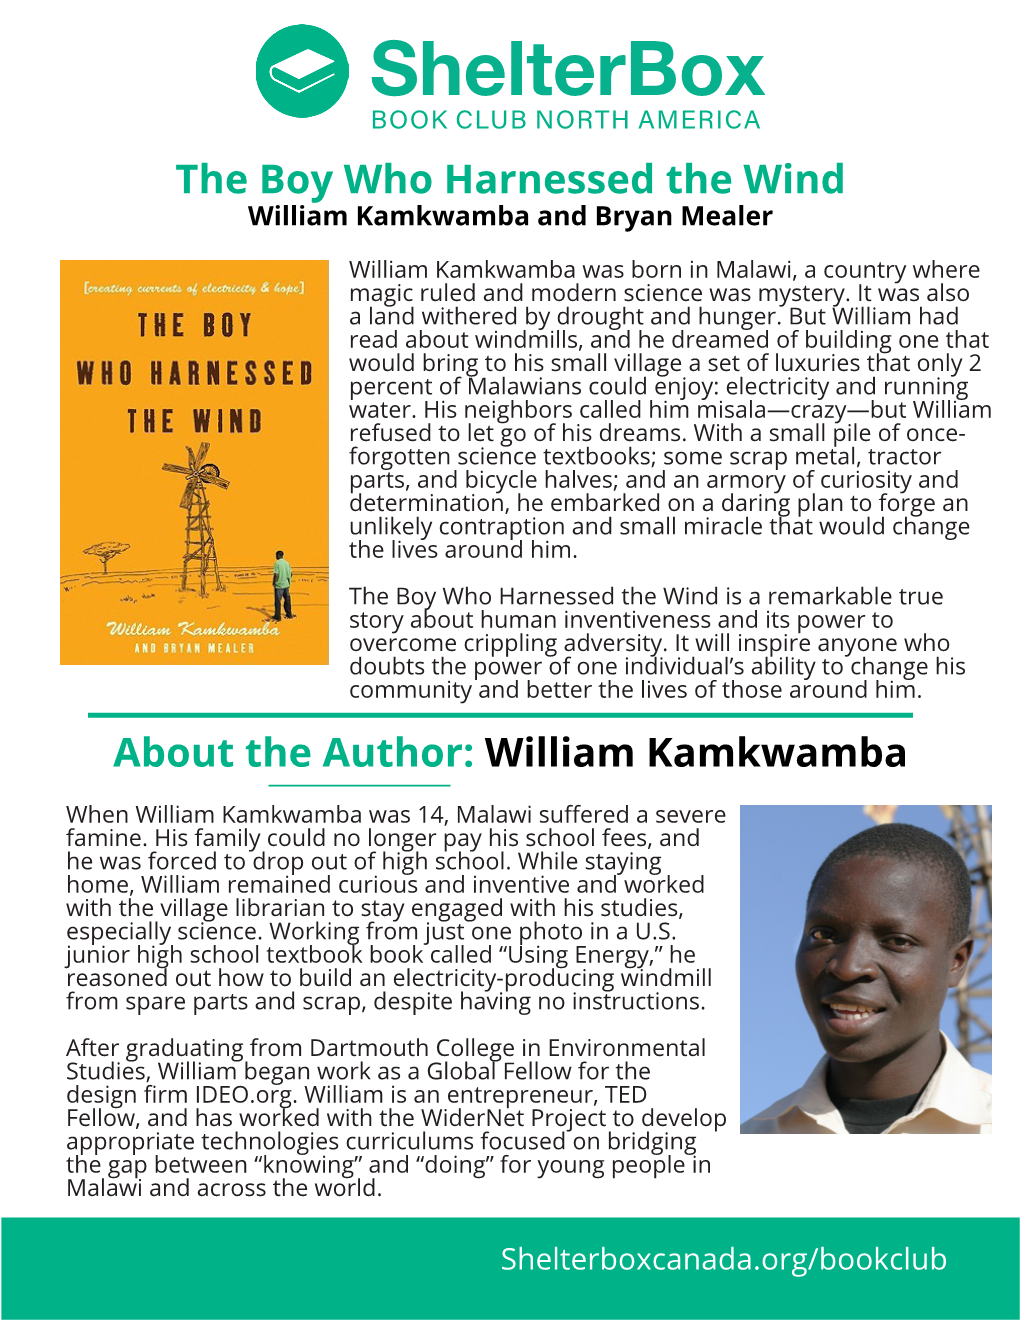 About the Author: William Kamkwamba the Boy Who Harnessed the Wind